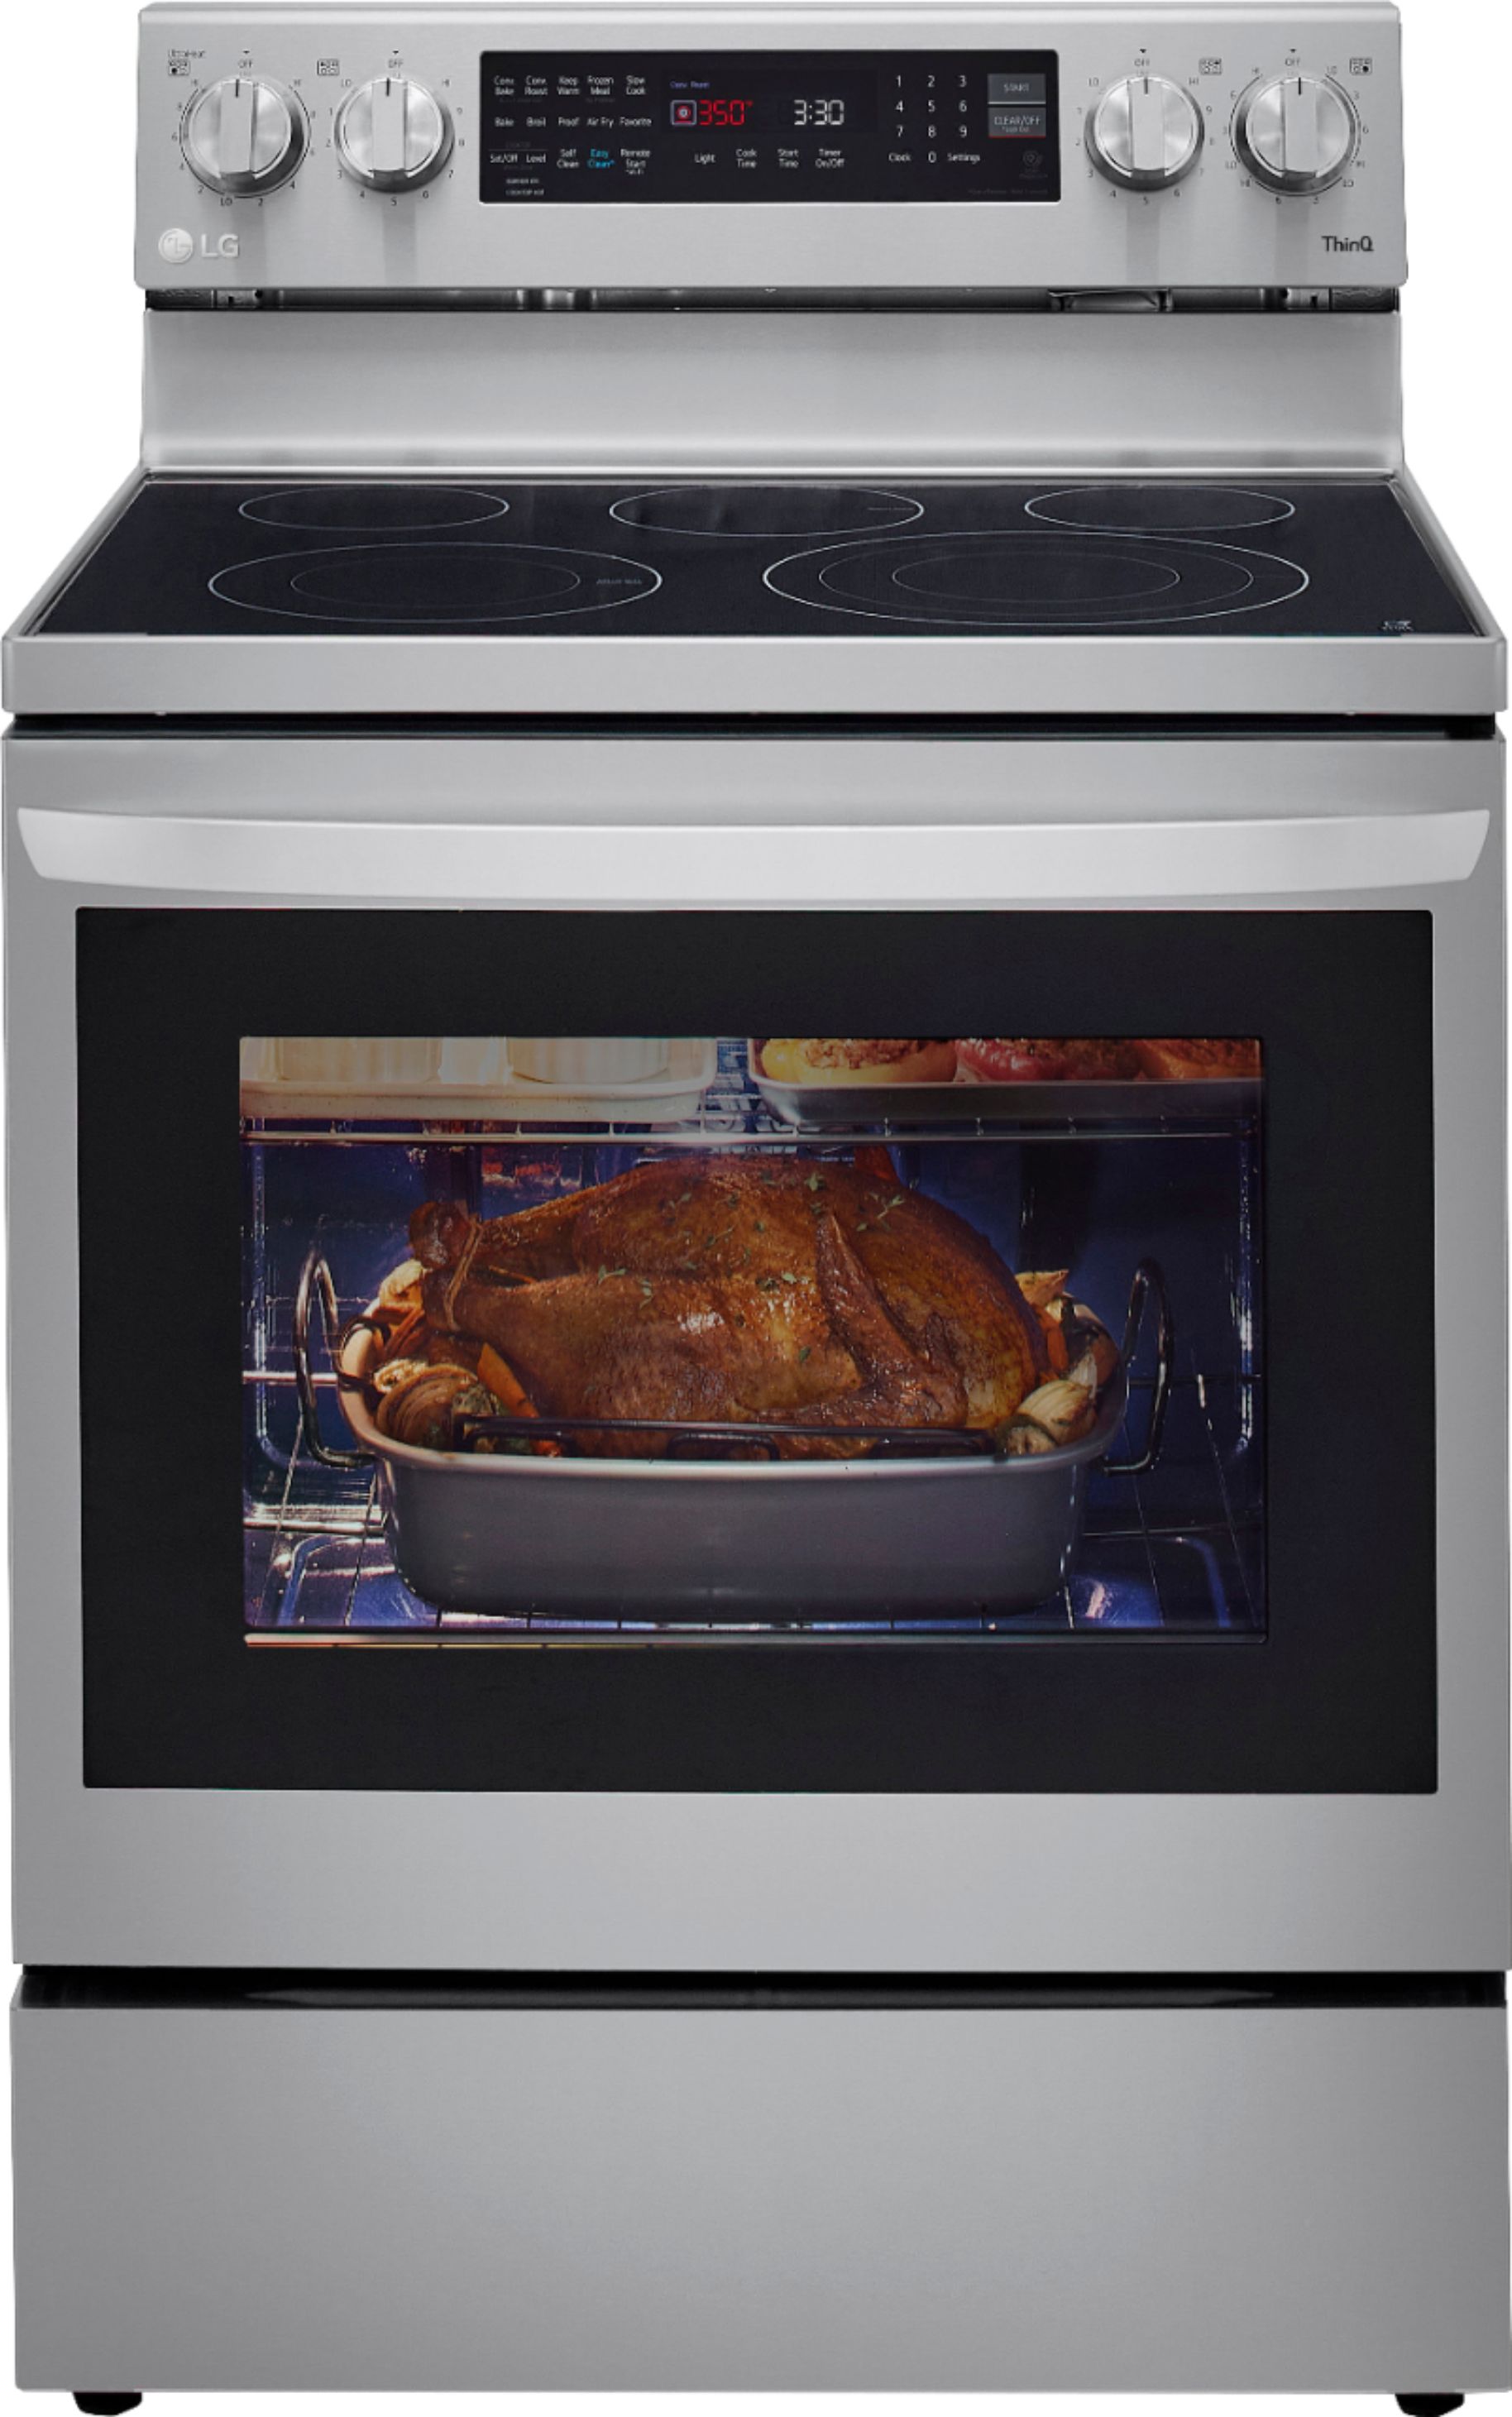 LG 6.3 Cu. Ft. Smart Freestanding Electric Convection Range with